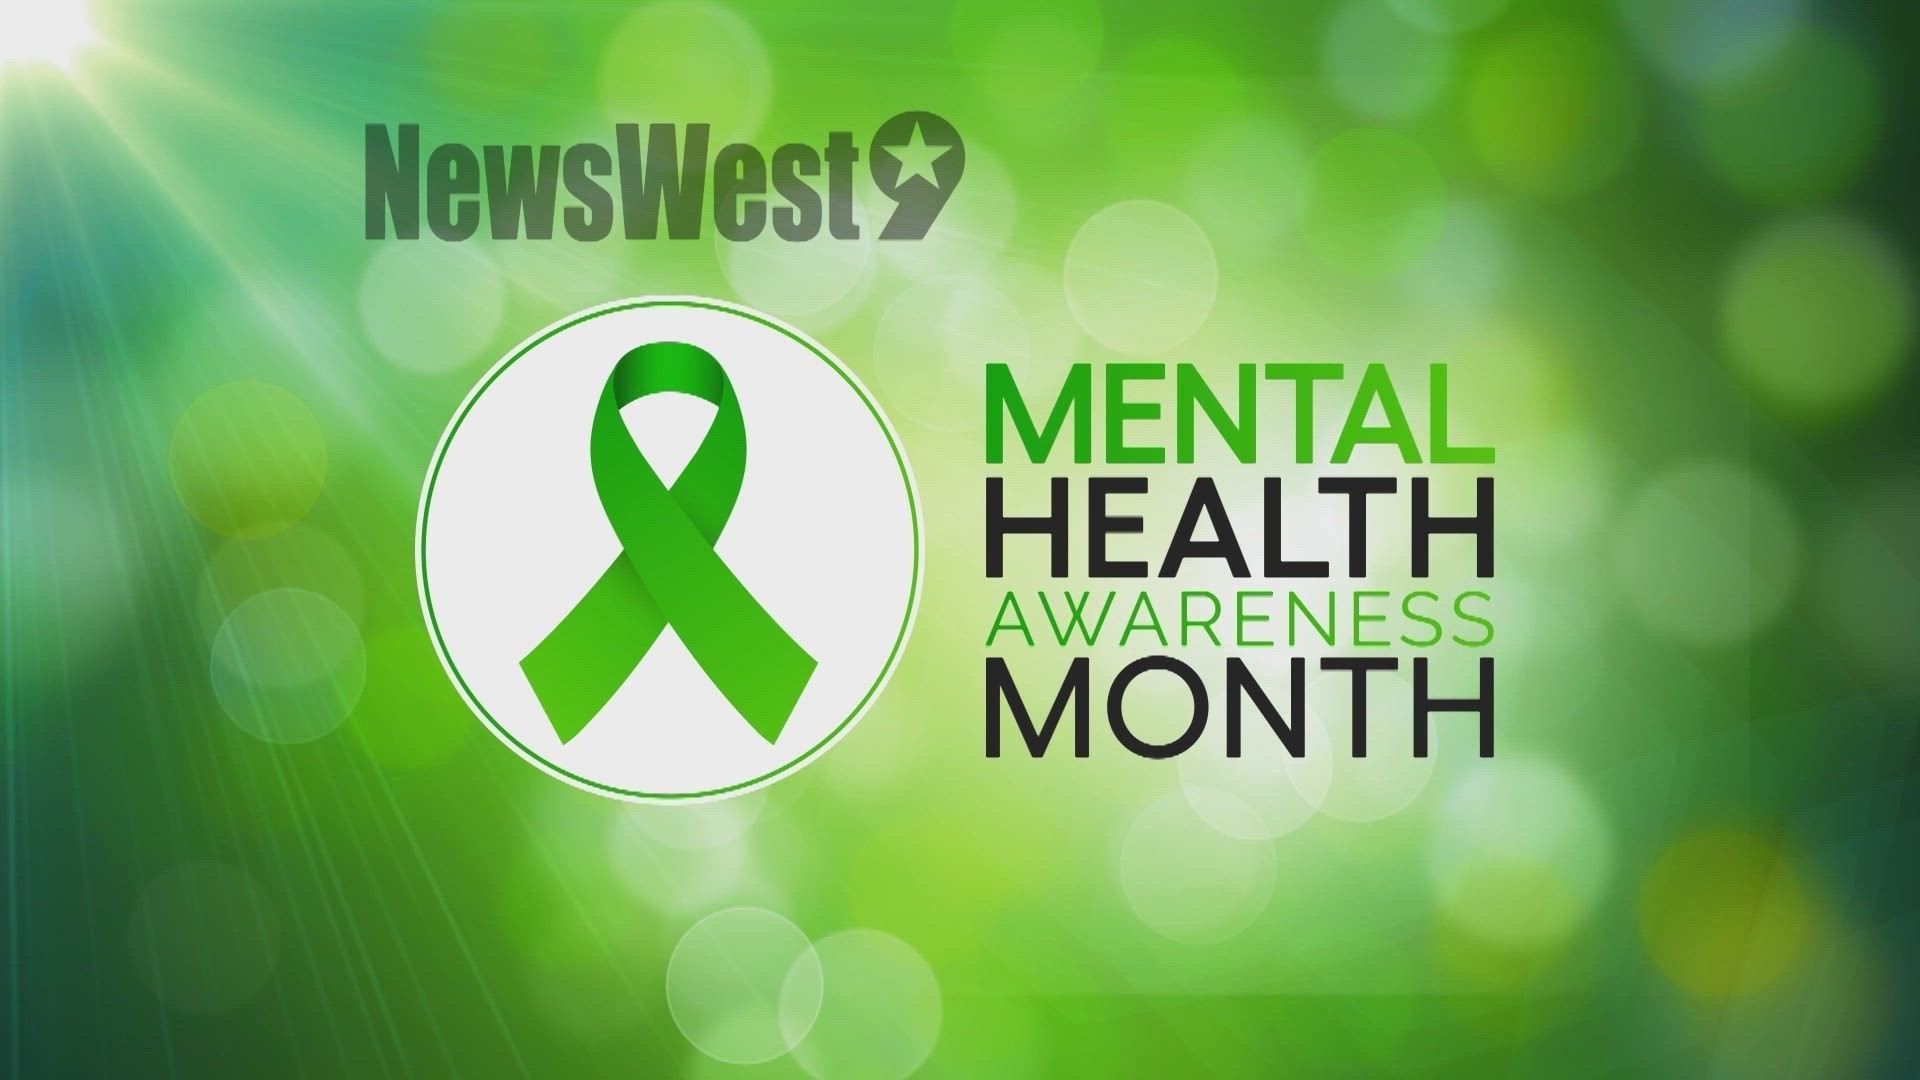 Meyers sat down with Anchor Alex Cammarata to highlight mental health struggles and how West Texas is fighting back.